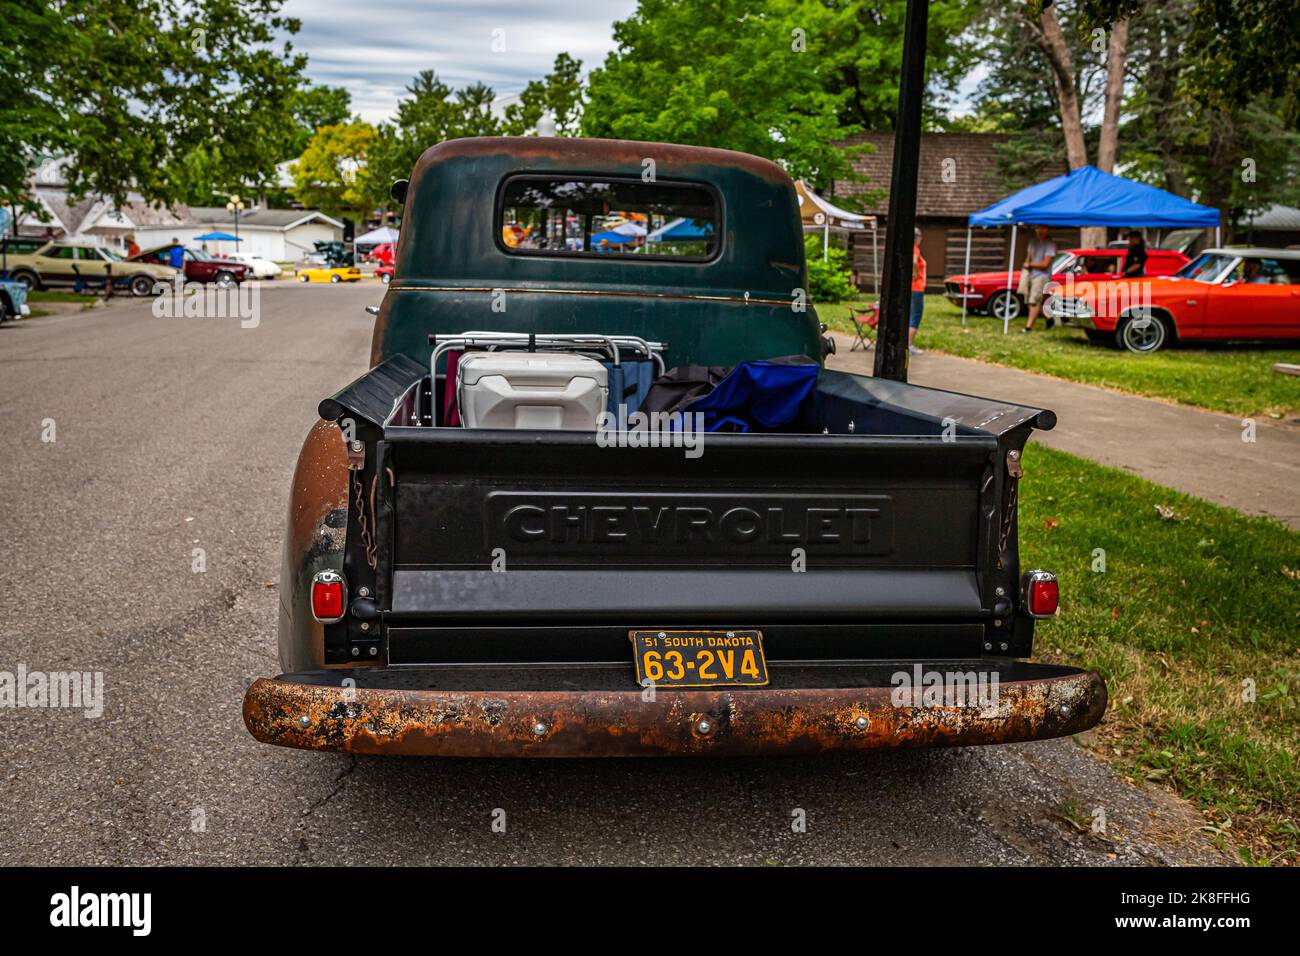 Des Moines, IA - July 01, 2022: High perspective rear view of an old 1951 Chevrolet Advance Design 3100 Pickup Truck at a local car show. Stock Photo